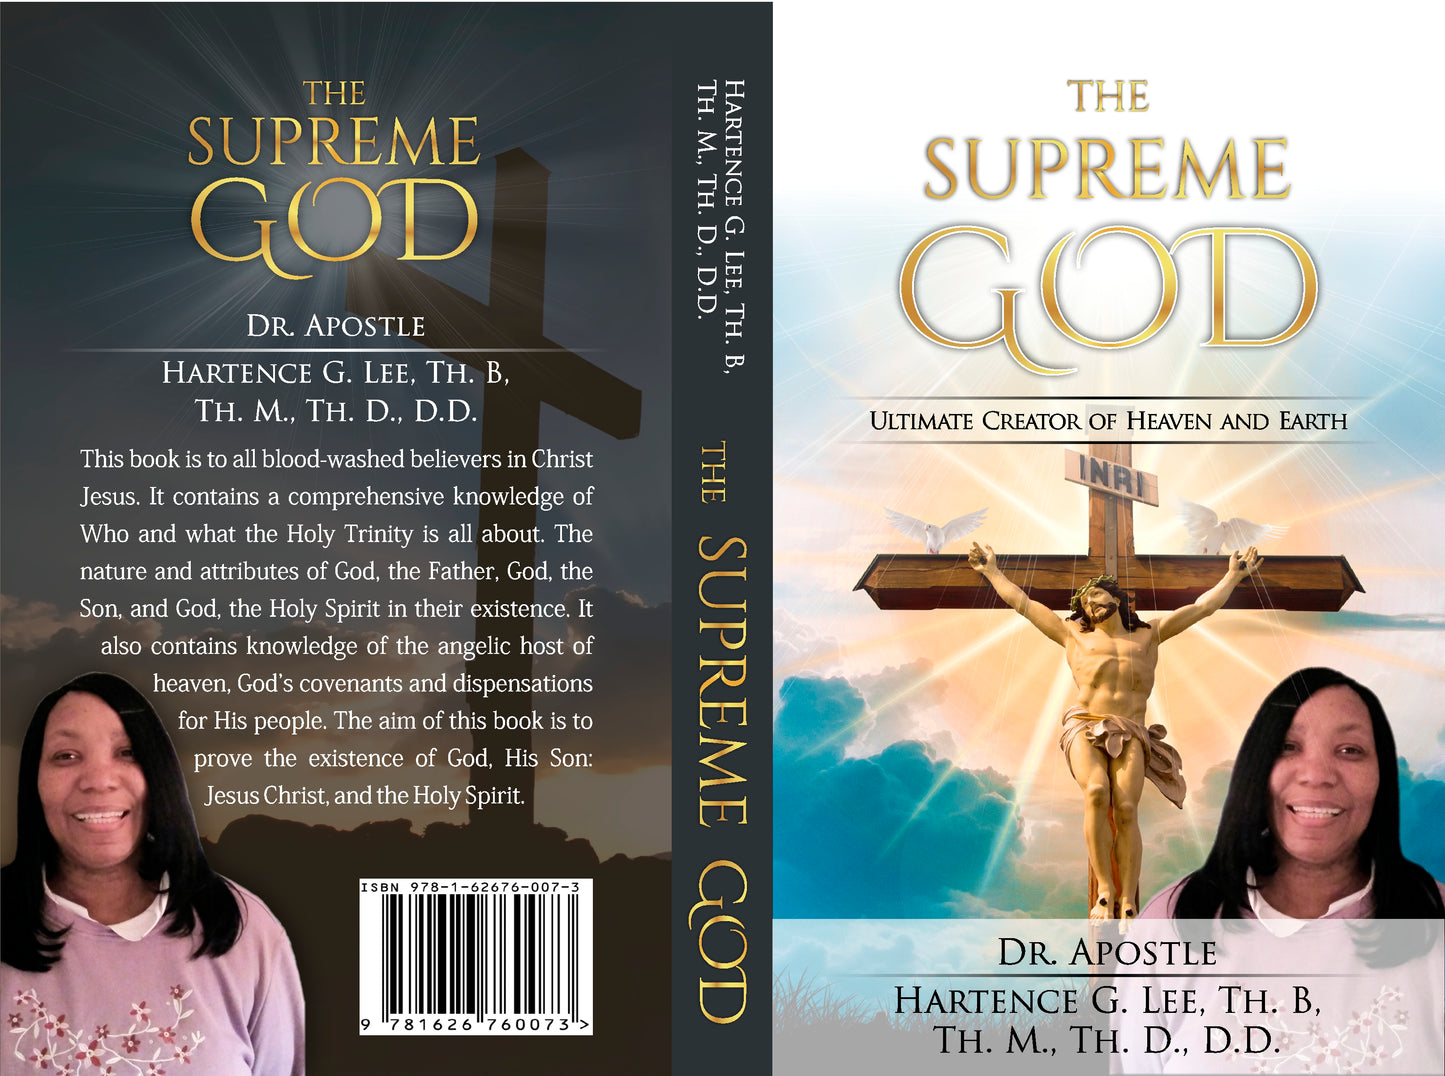 The Supreme God Details: NEW BOOK RELEASE COMING OUT SOON !